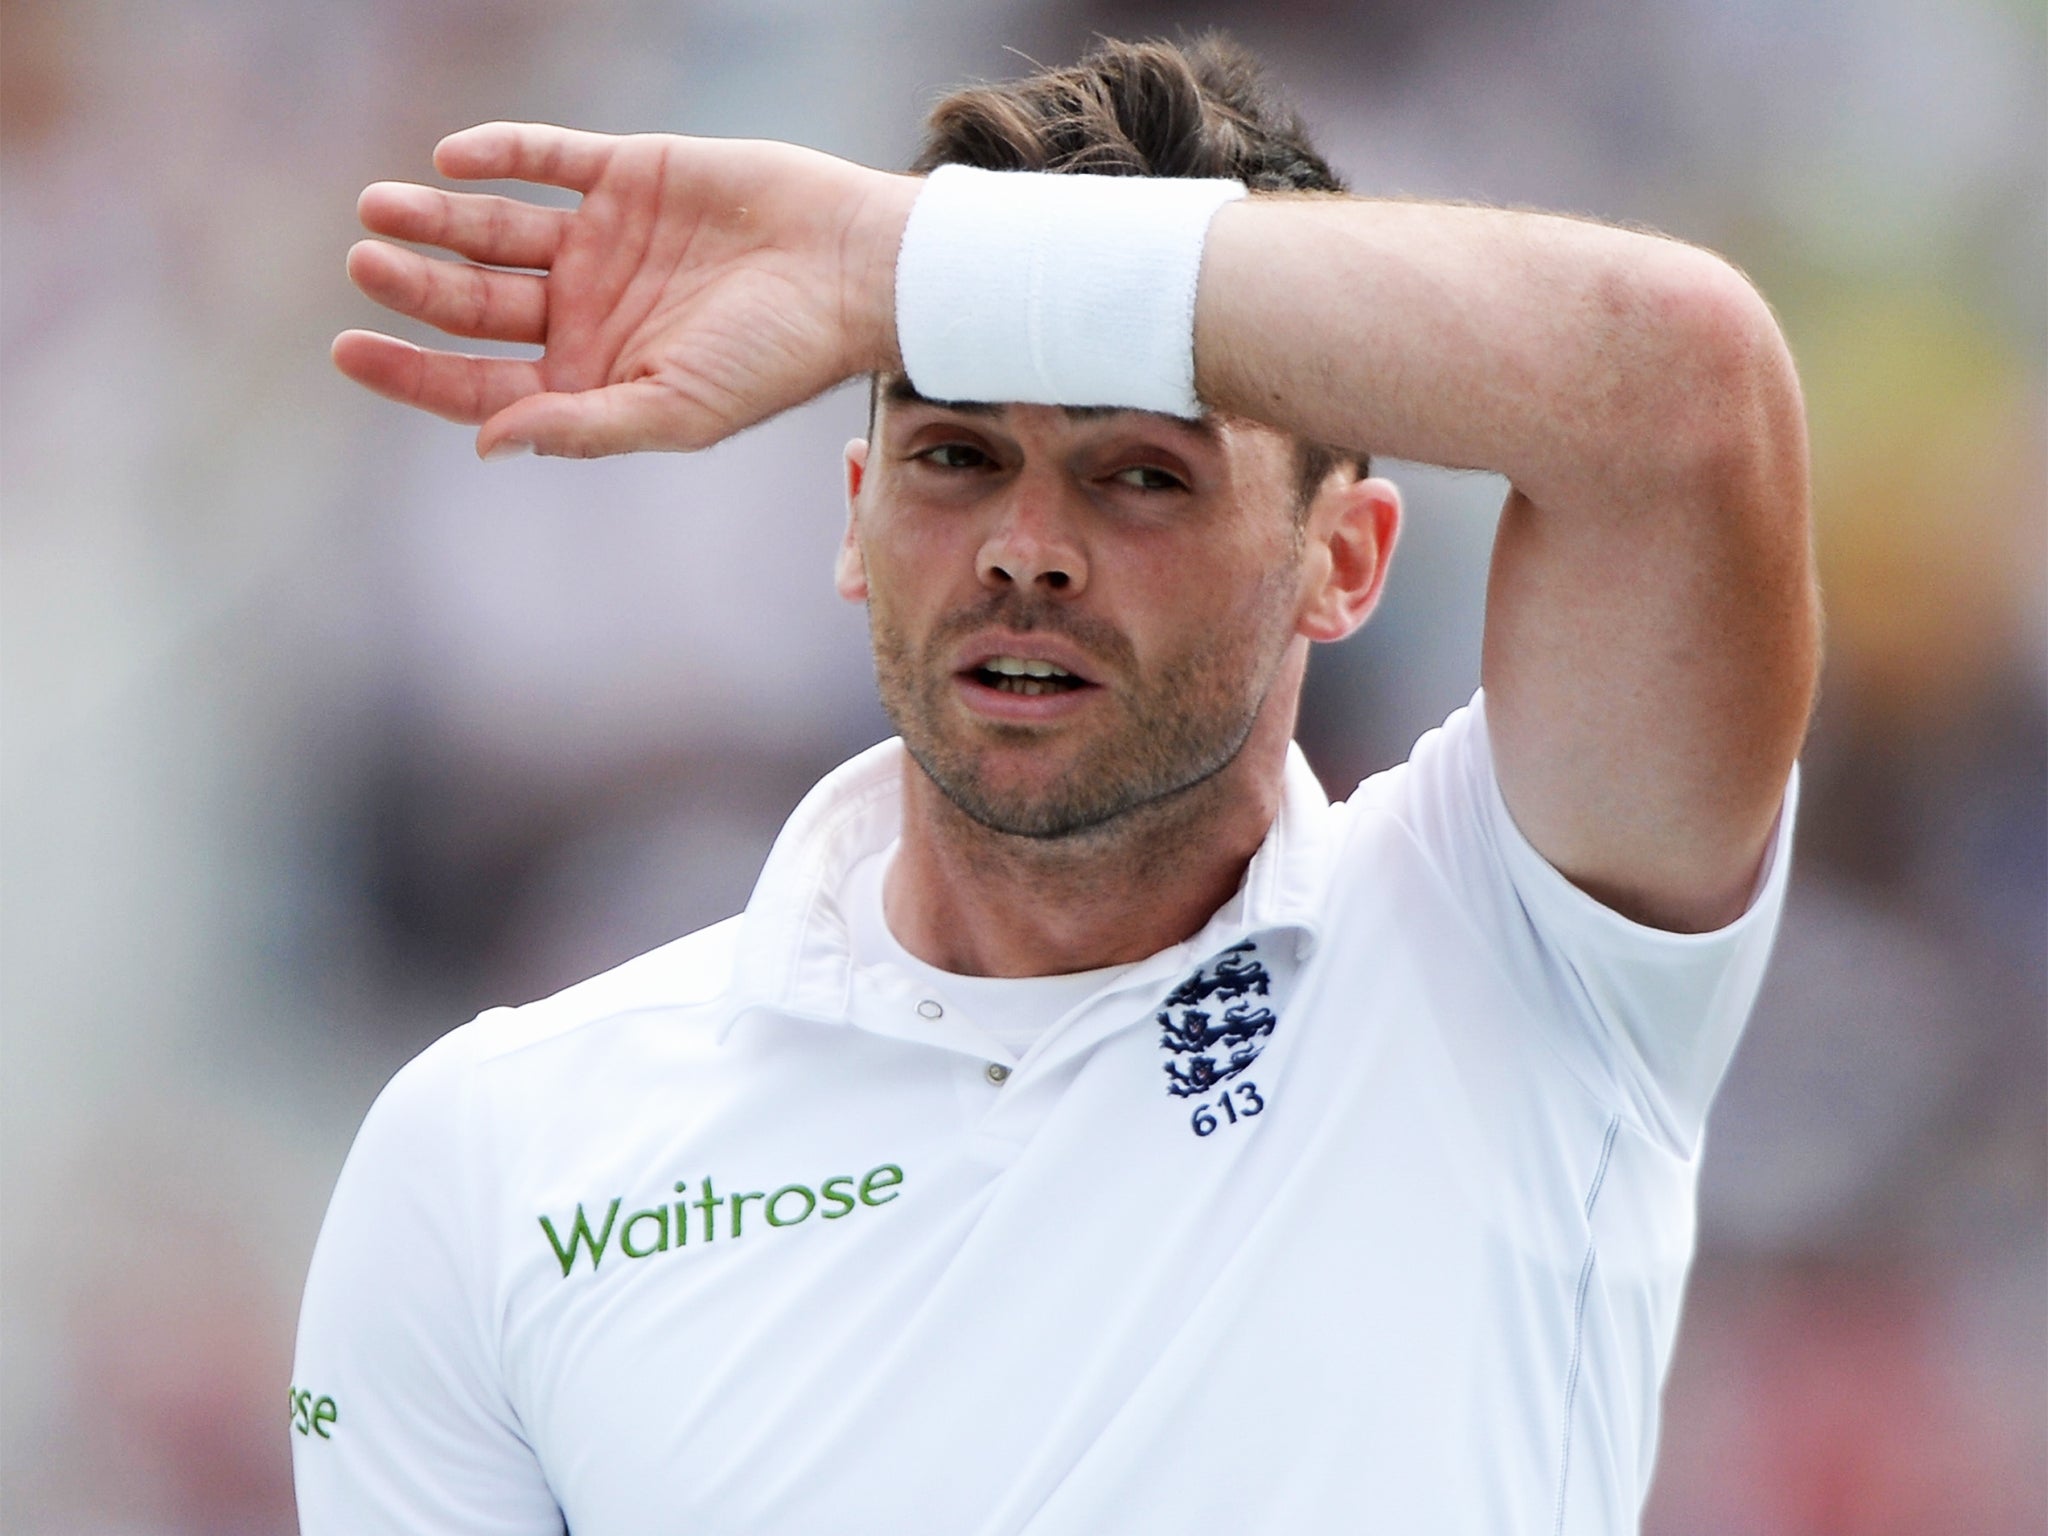 England fast bowler Jimmy Anderson has been given the ECB’s full support to clear his name